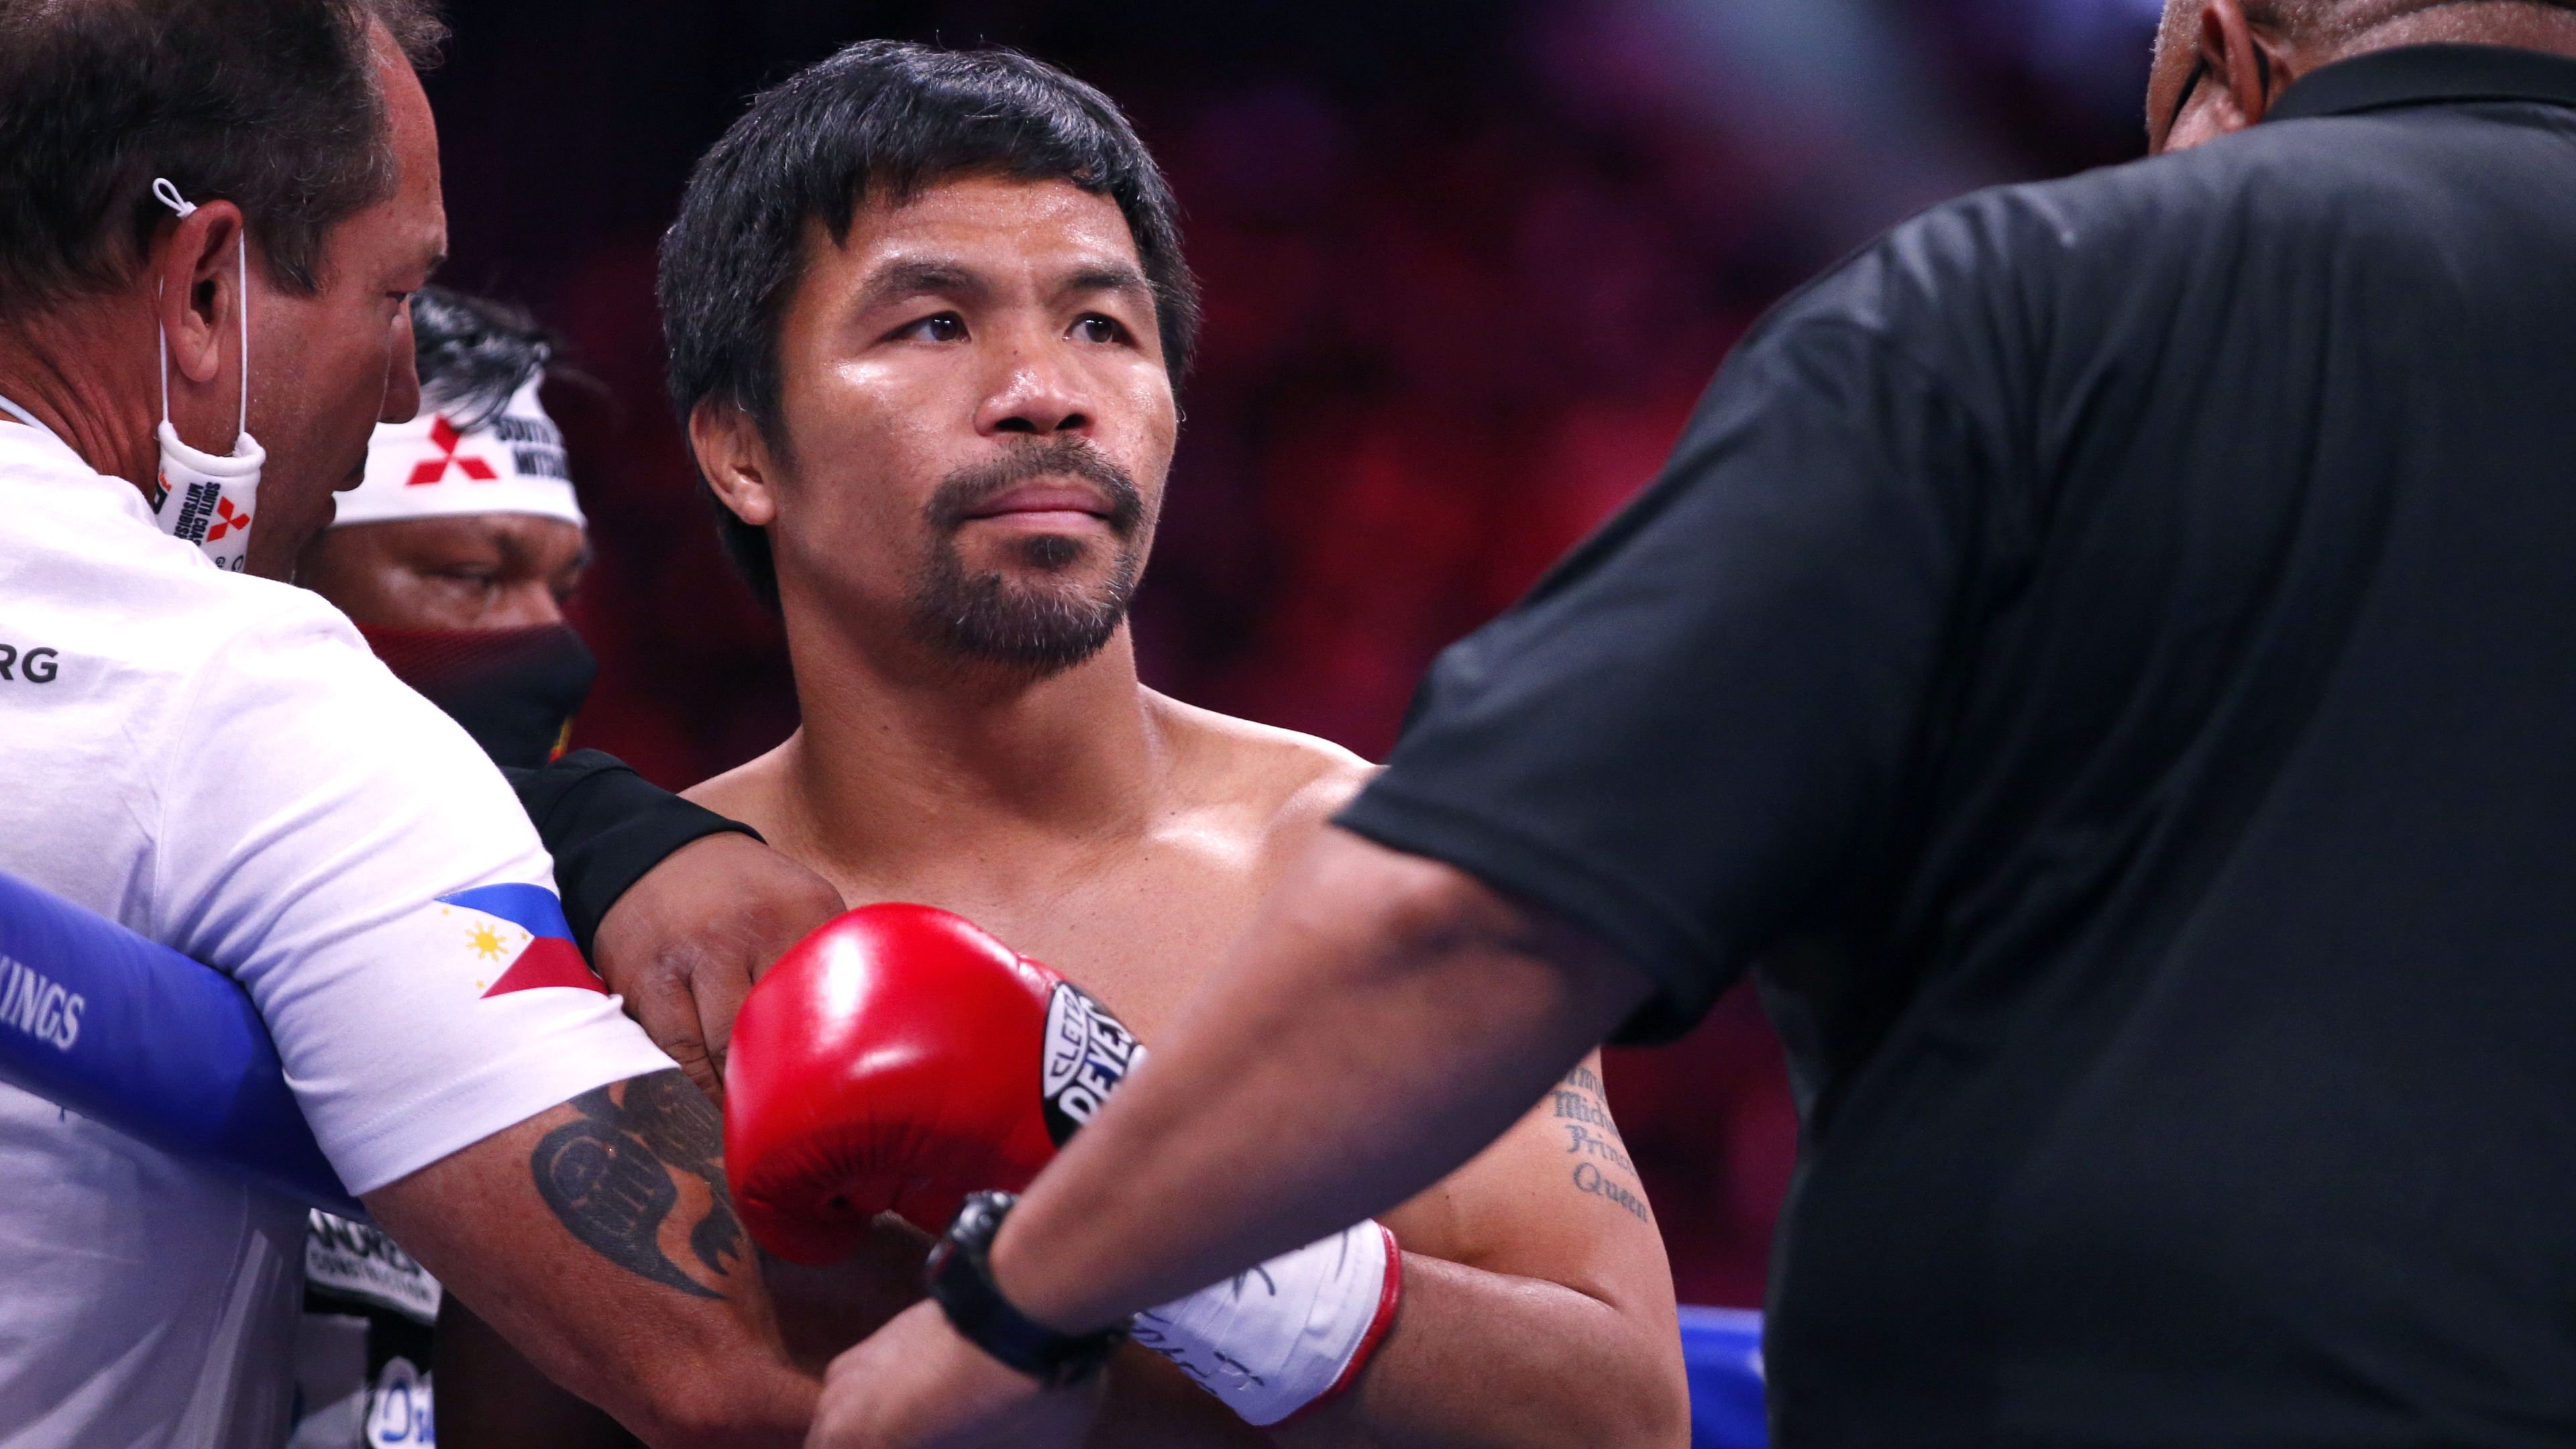 Boxing legend Manny Pacquiao to run for Philippines presidency